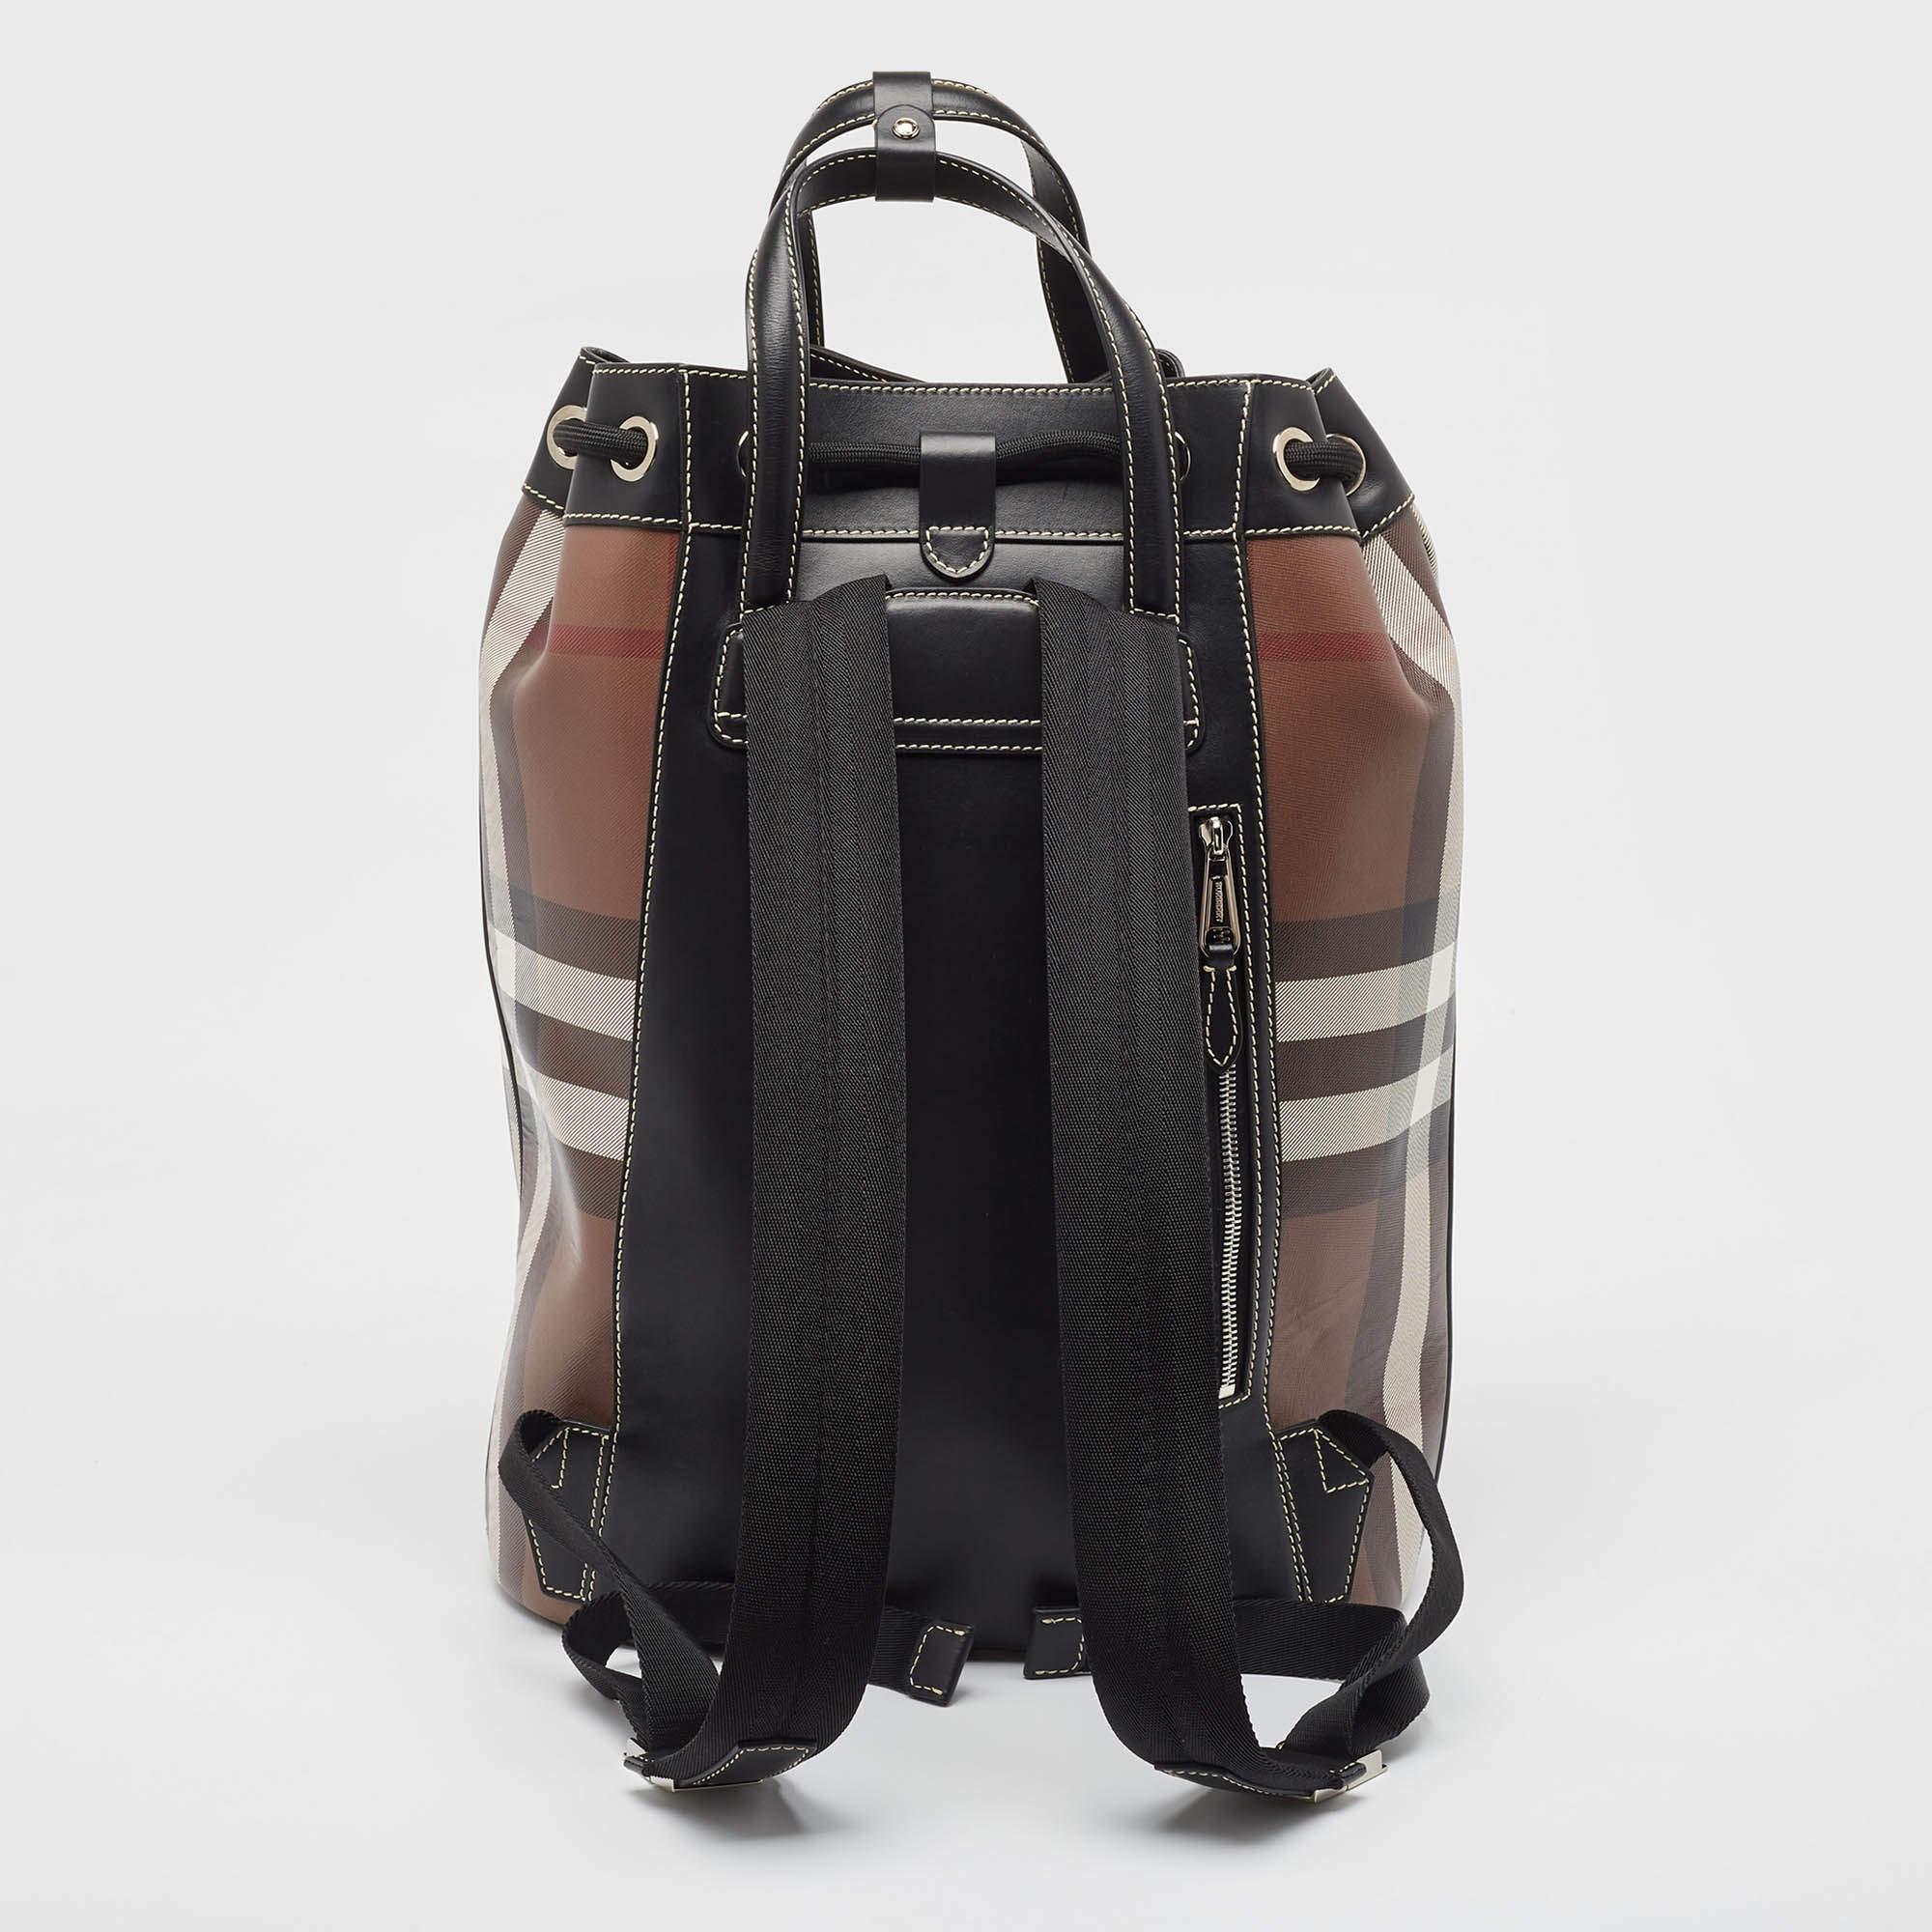 Elevate your style with this Burberry backpack. Crafted with precision and passion, this chic accessory seamlessly blends fashion and function, offering an elegant solution for the modern, on-the-go lifestyle.

Includes: Original Dustbag, Info